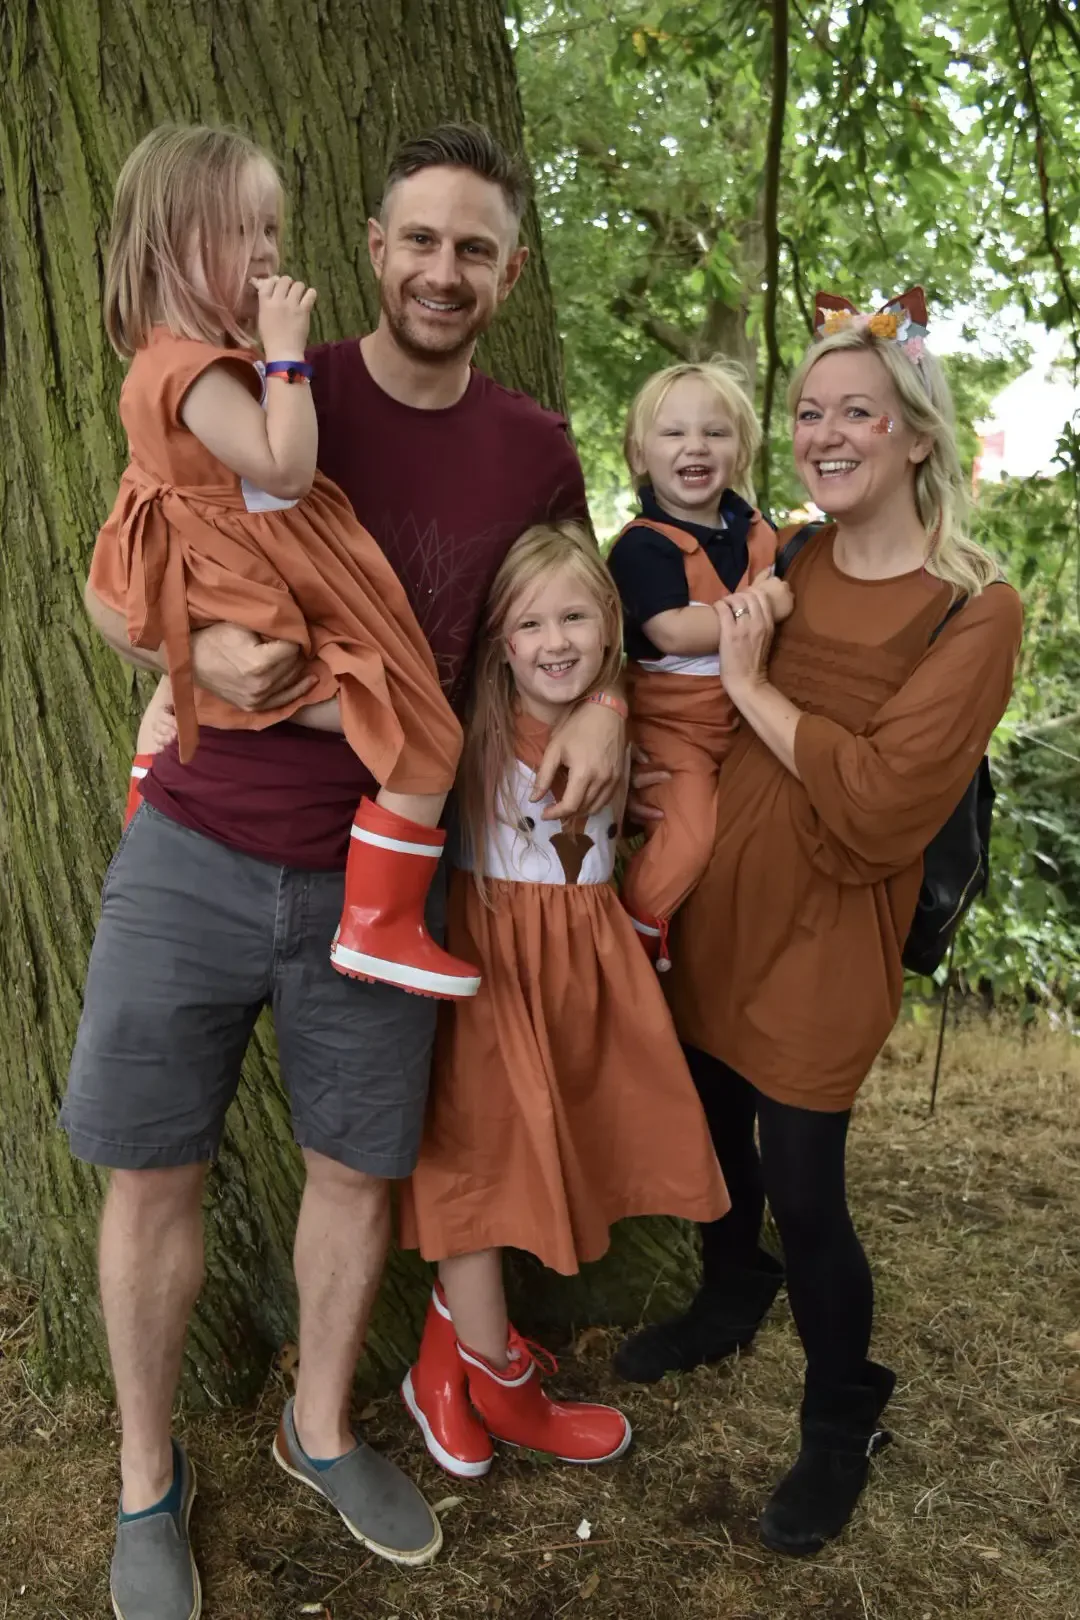 Dressing up as foxes for Just so Festival 2018. Join in with the tribes for festival fun!